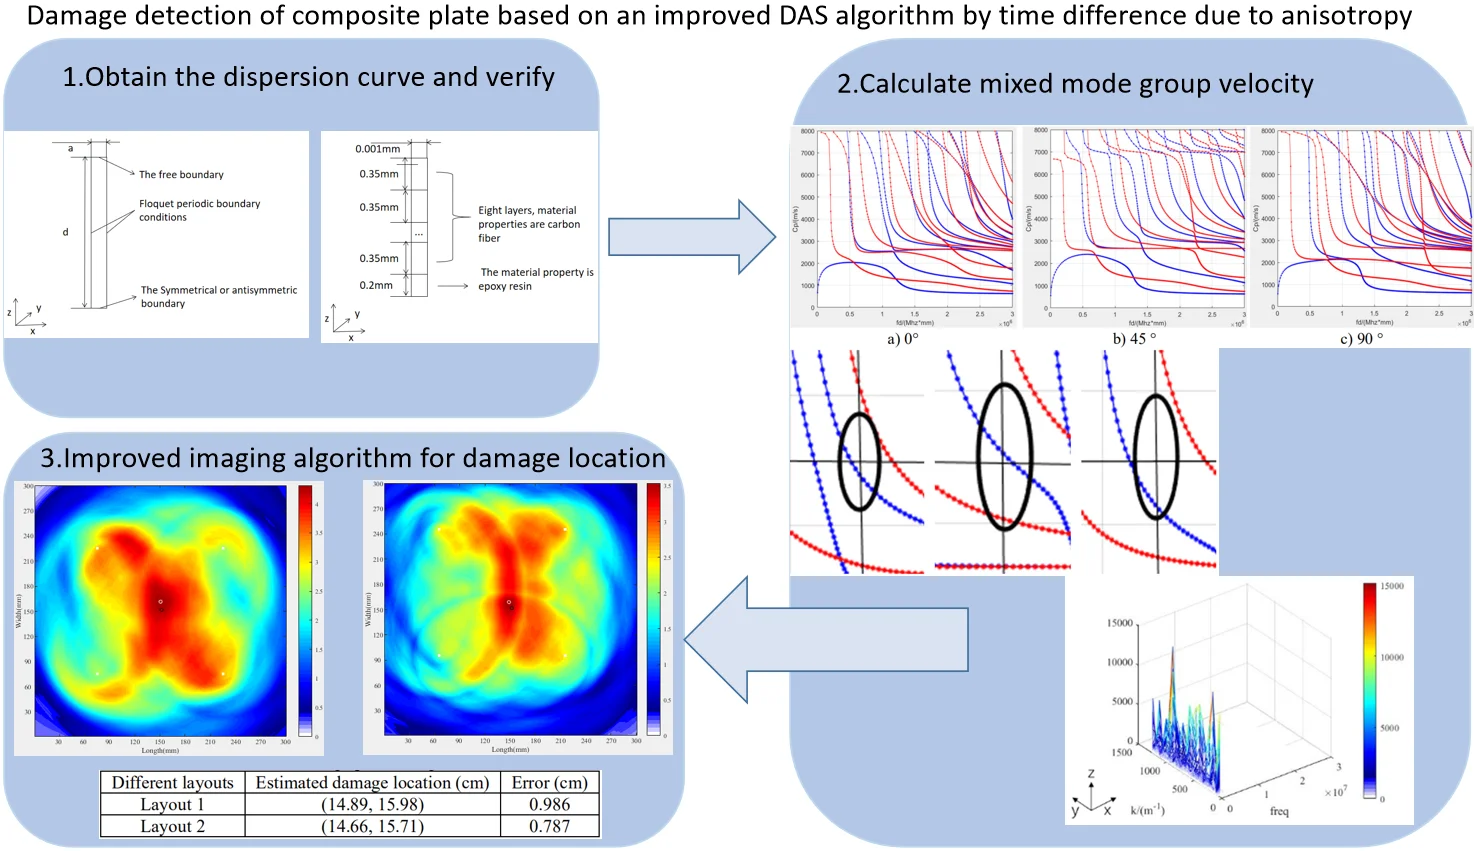 Damage detection of composite plate based on an improved DAS algorithm by time difference due to anisotropy